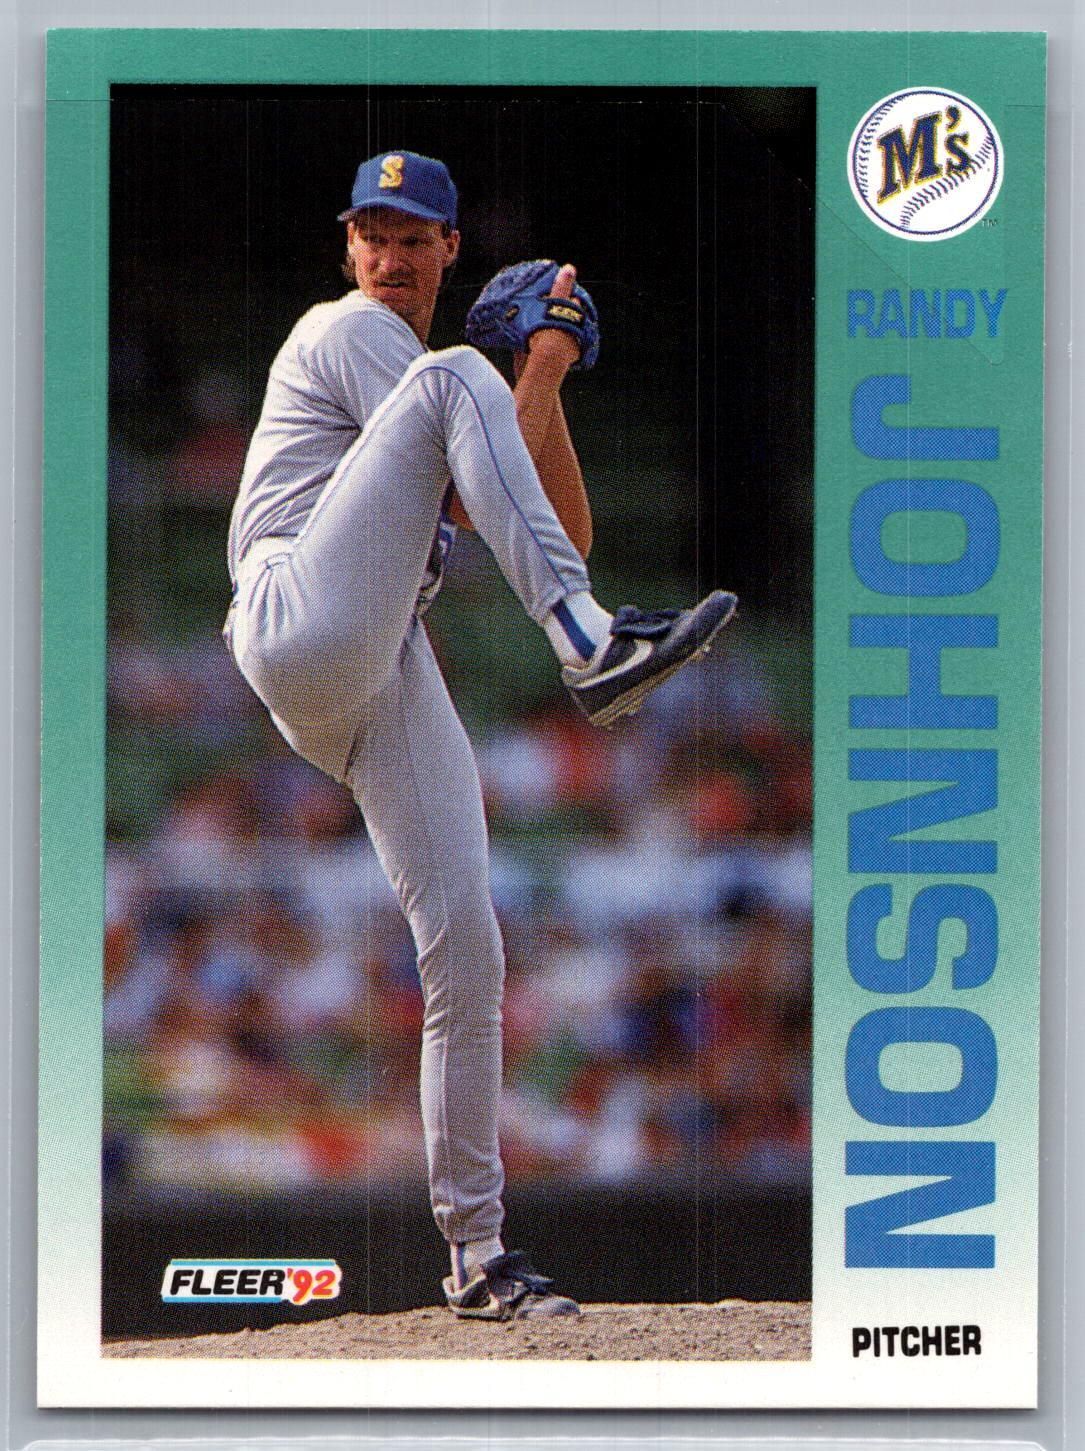 Primary image for 1992 Fleer #283 Randy Johnson Card HOF Mariners CY Young Pitcher